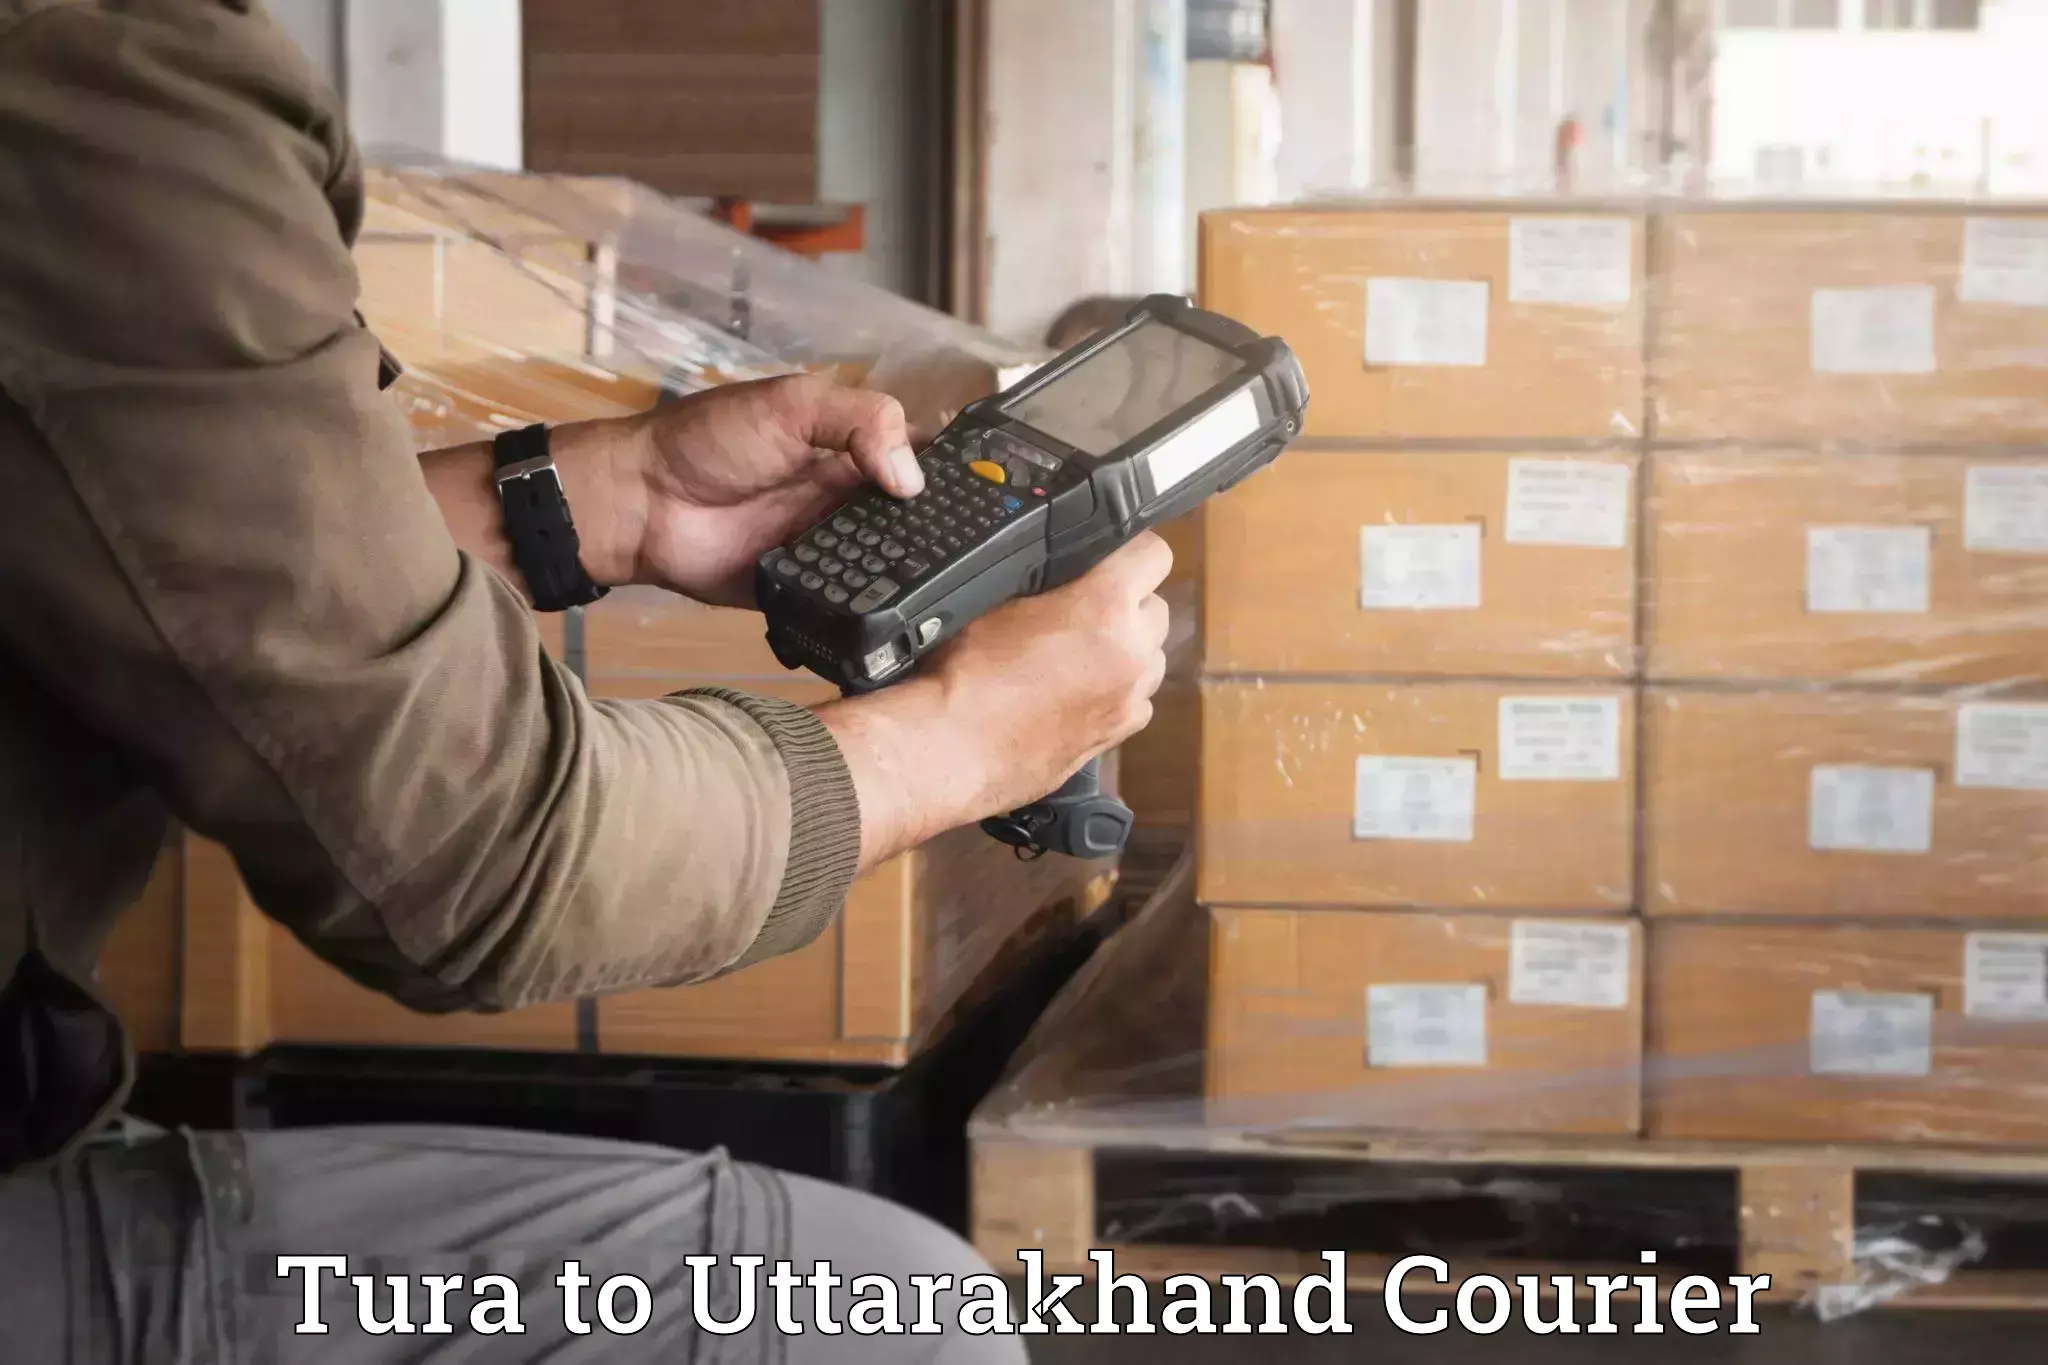 Expert moving and storage in Tura to Nainital